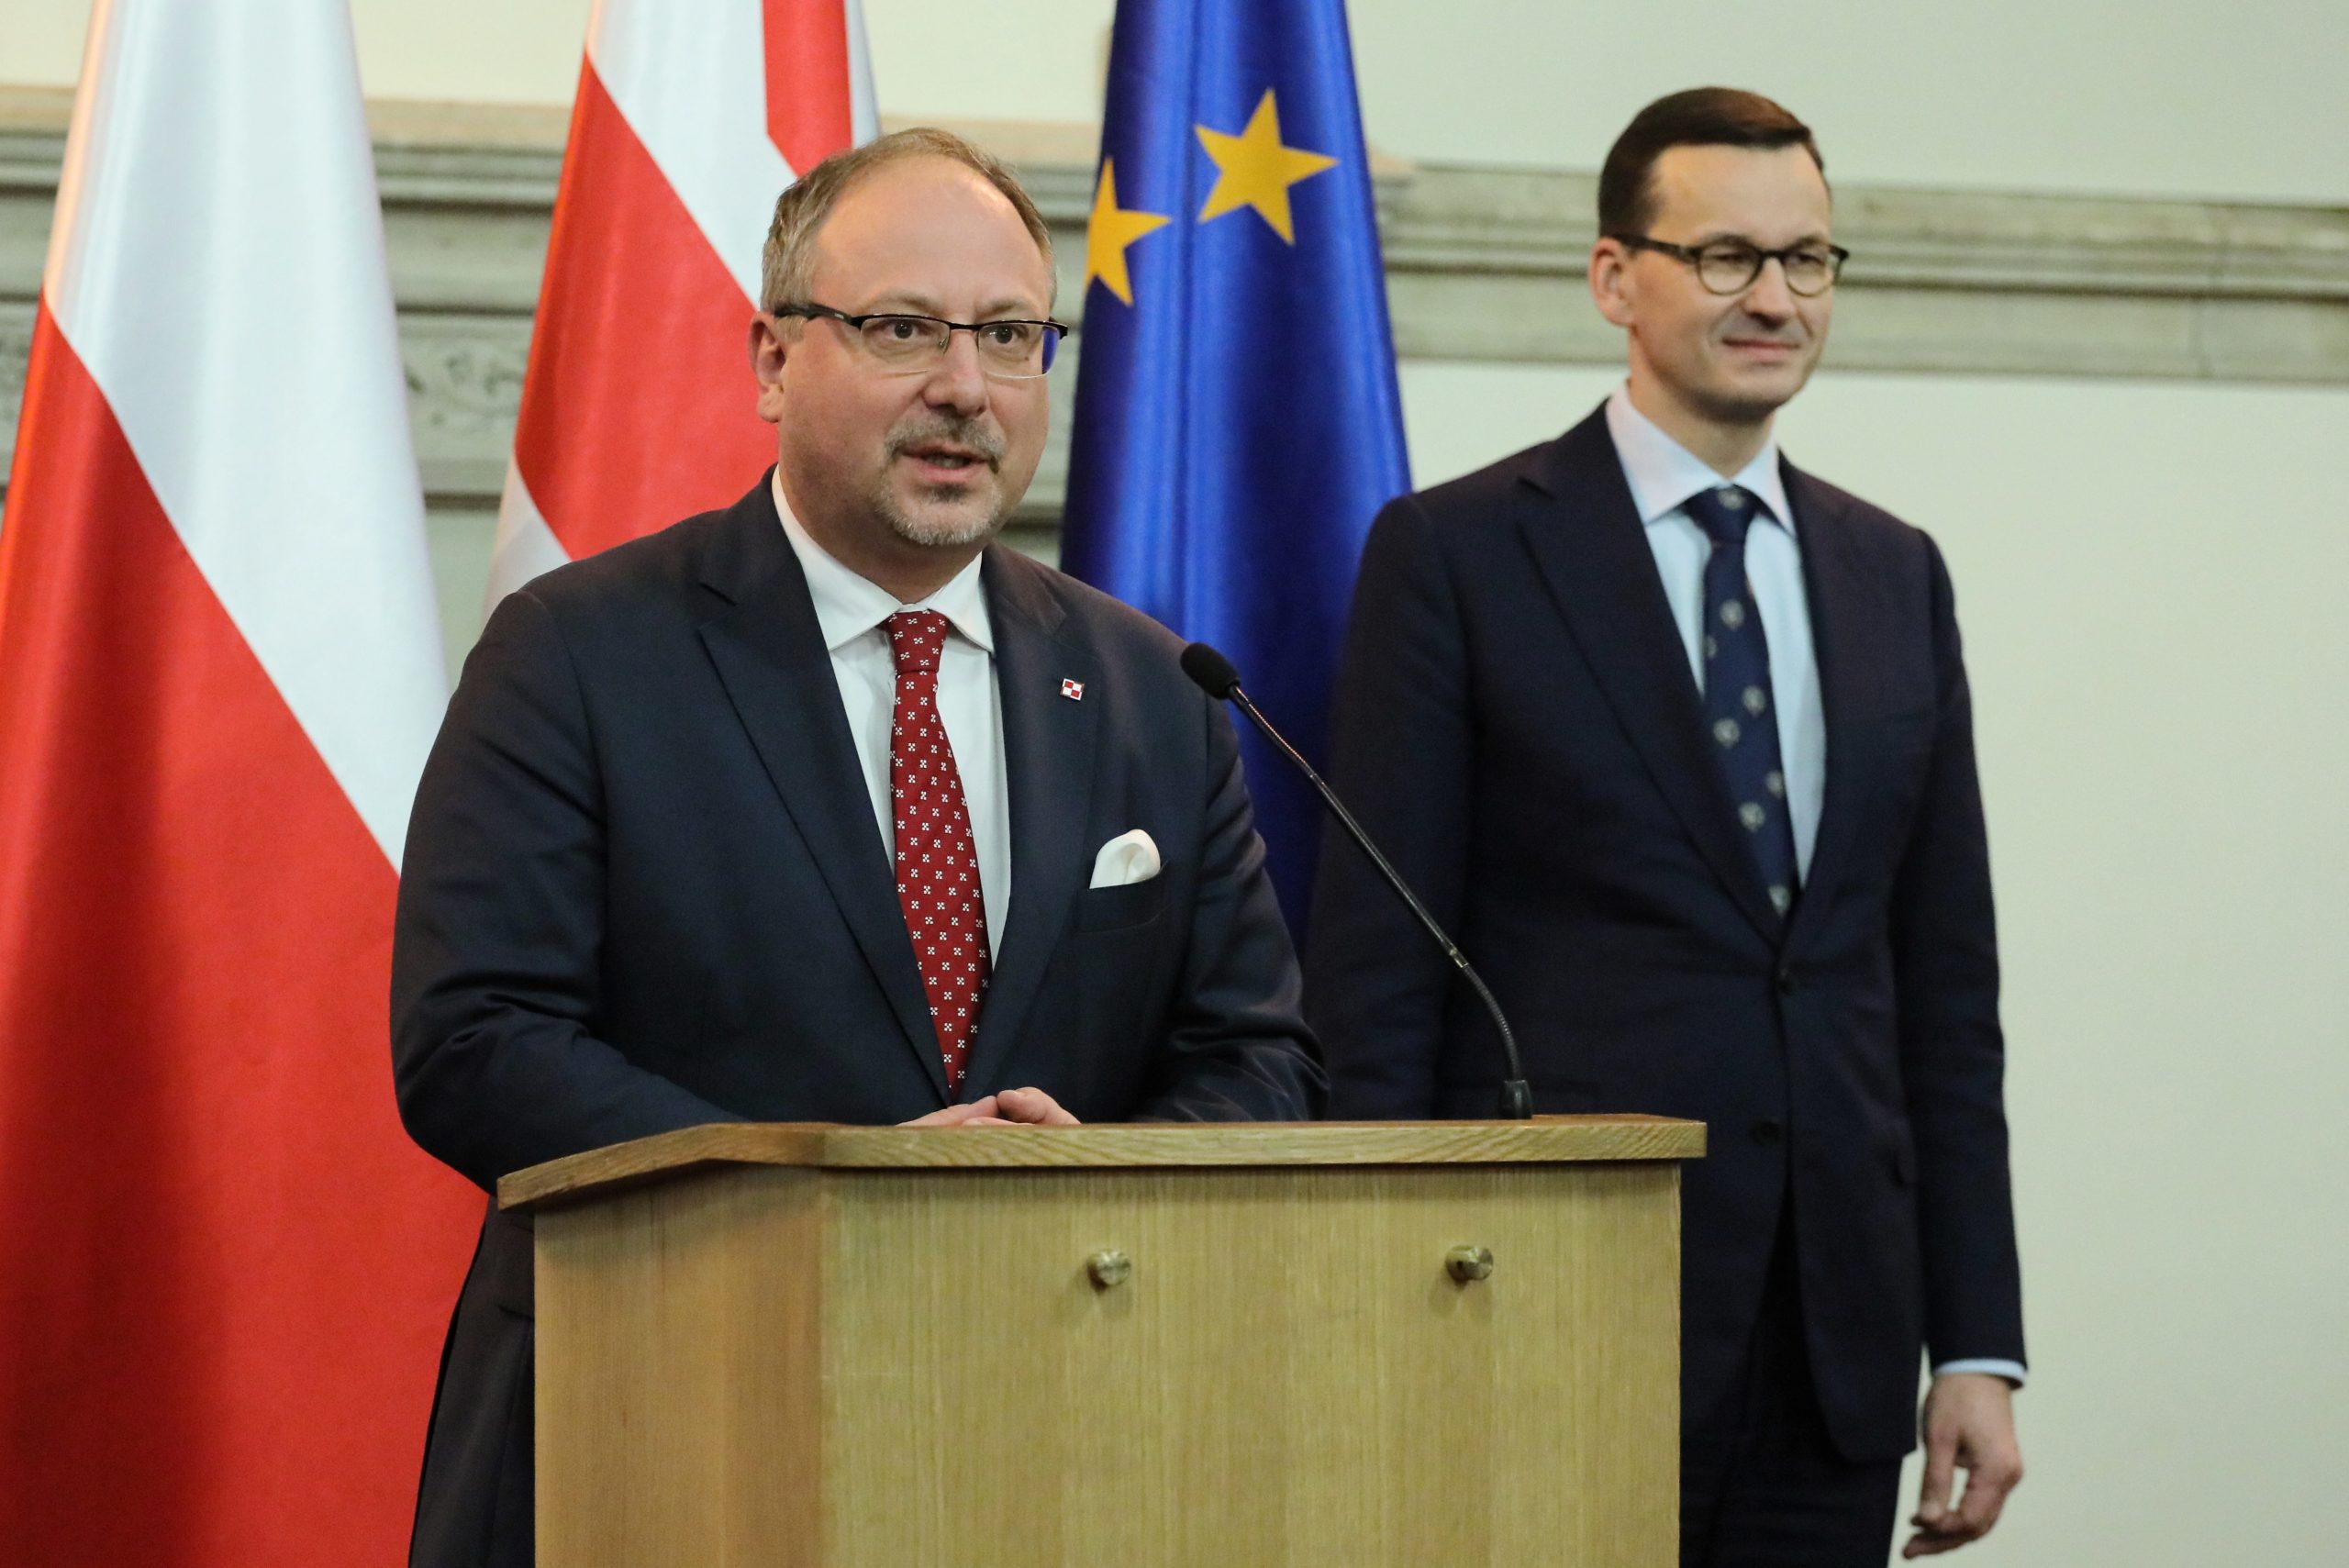 New chapter: Poland – UK relations after Brexit